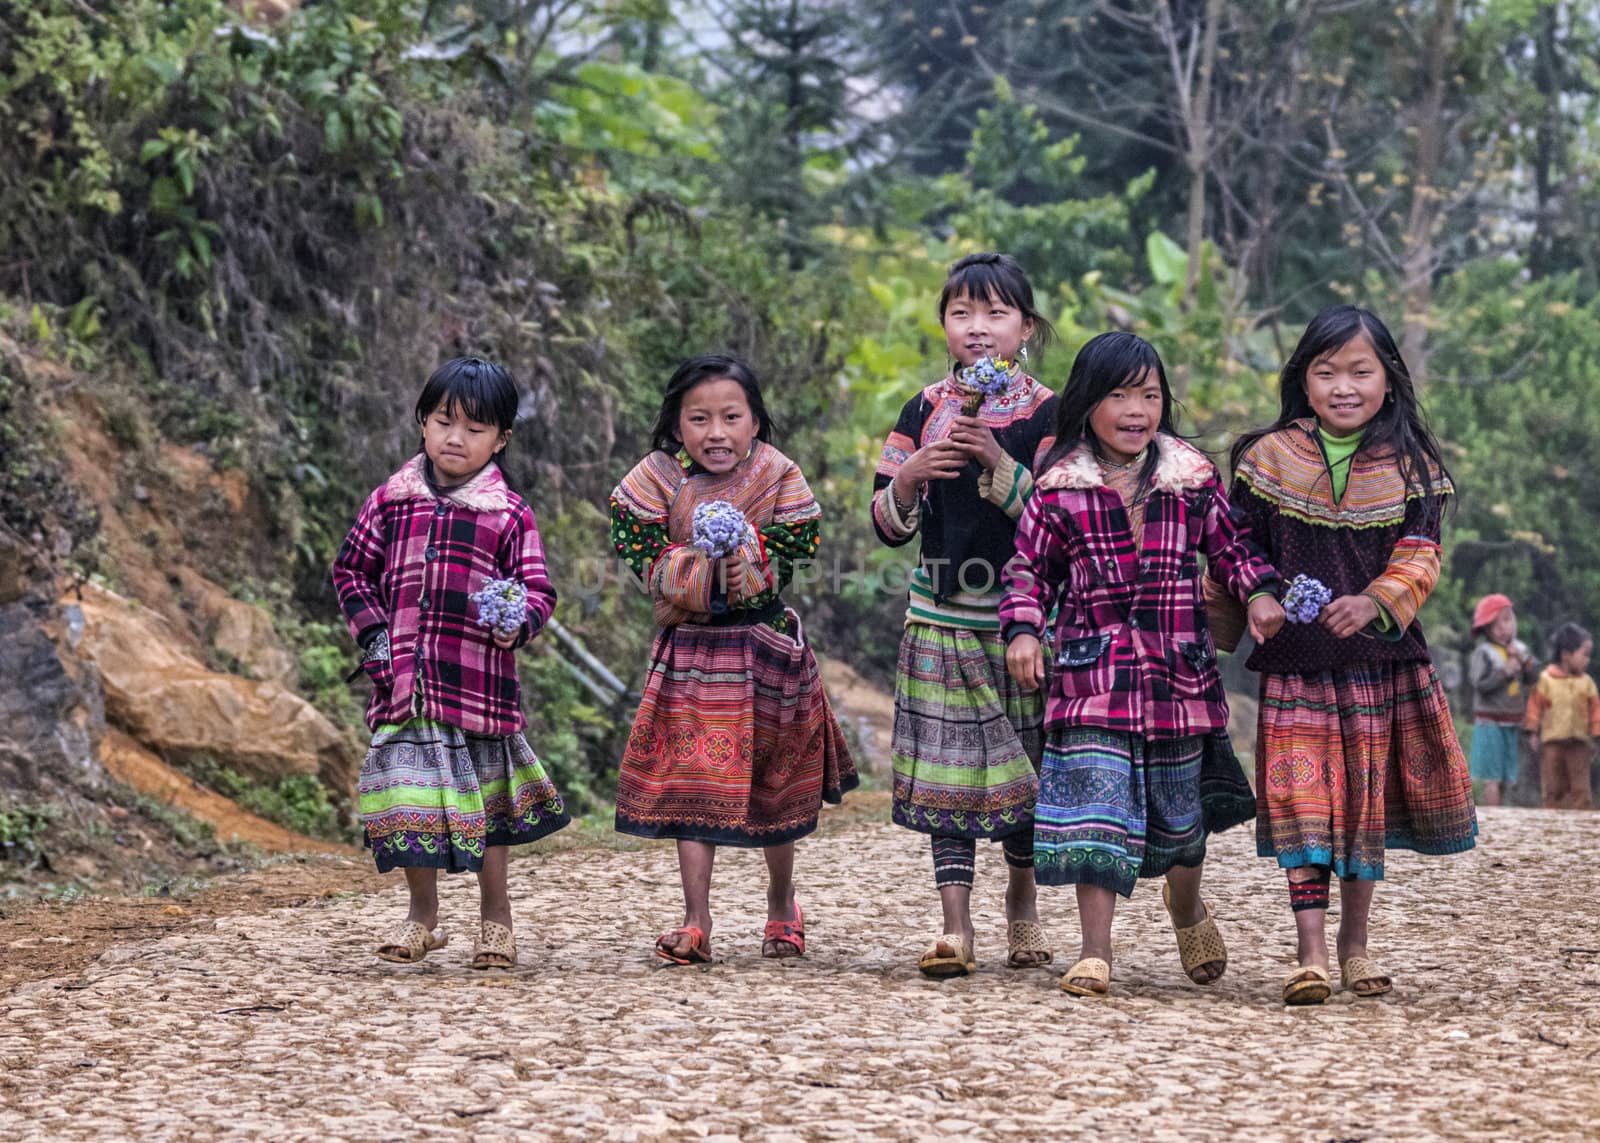 Five young beauties in colorful traditional dress with wild flowers and big smiles.